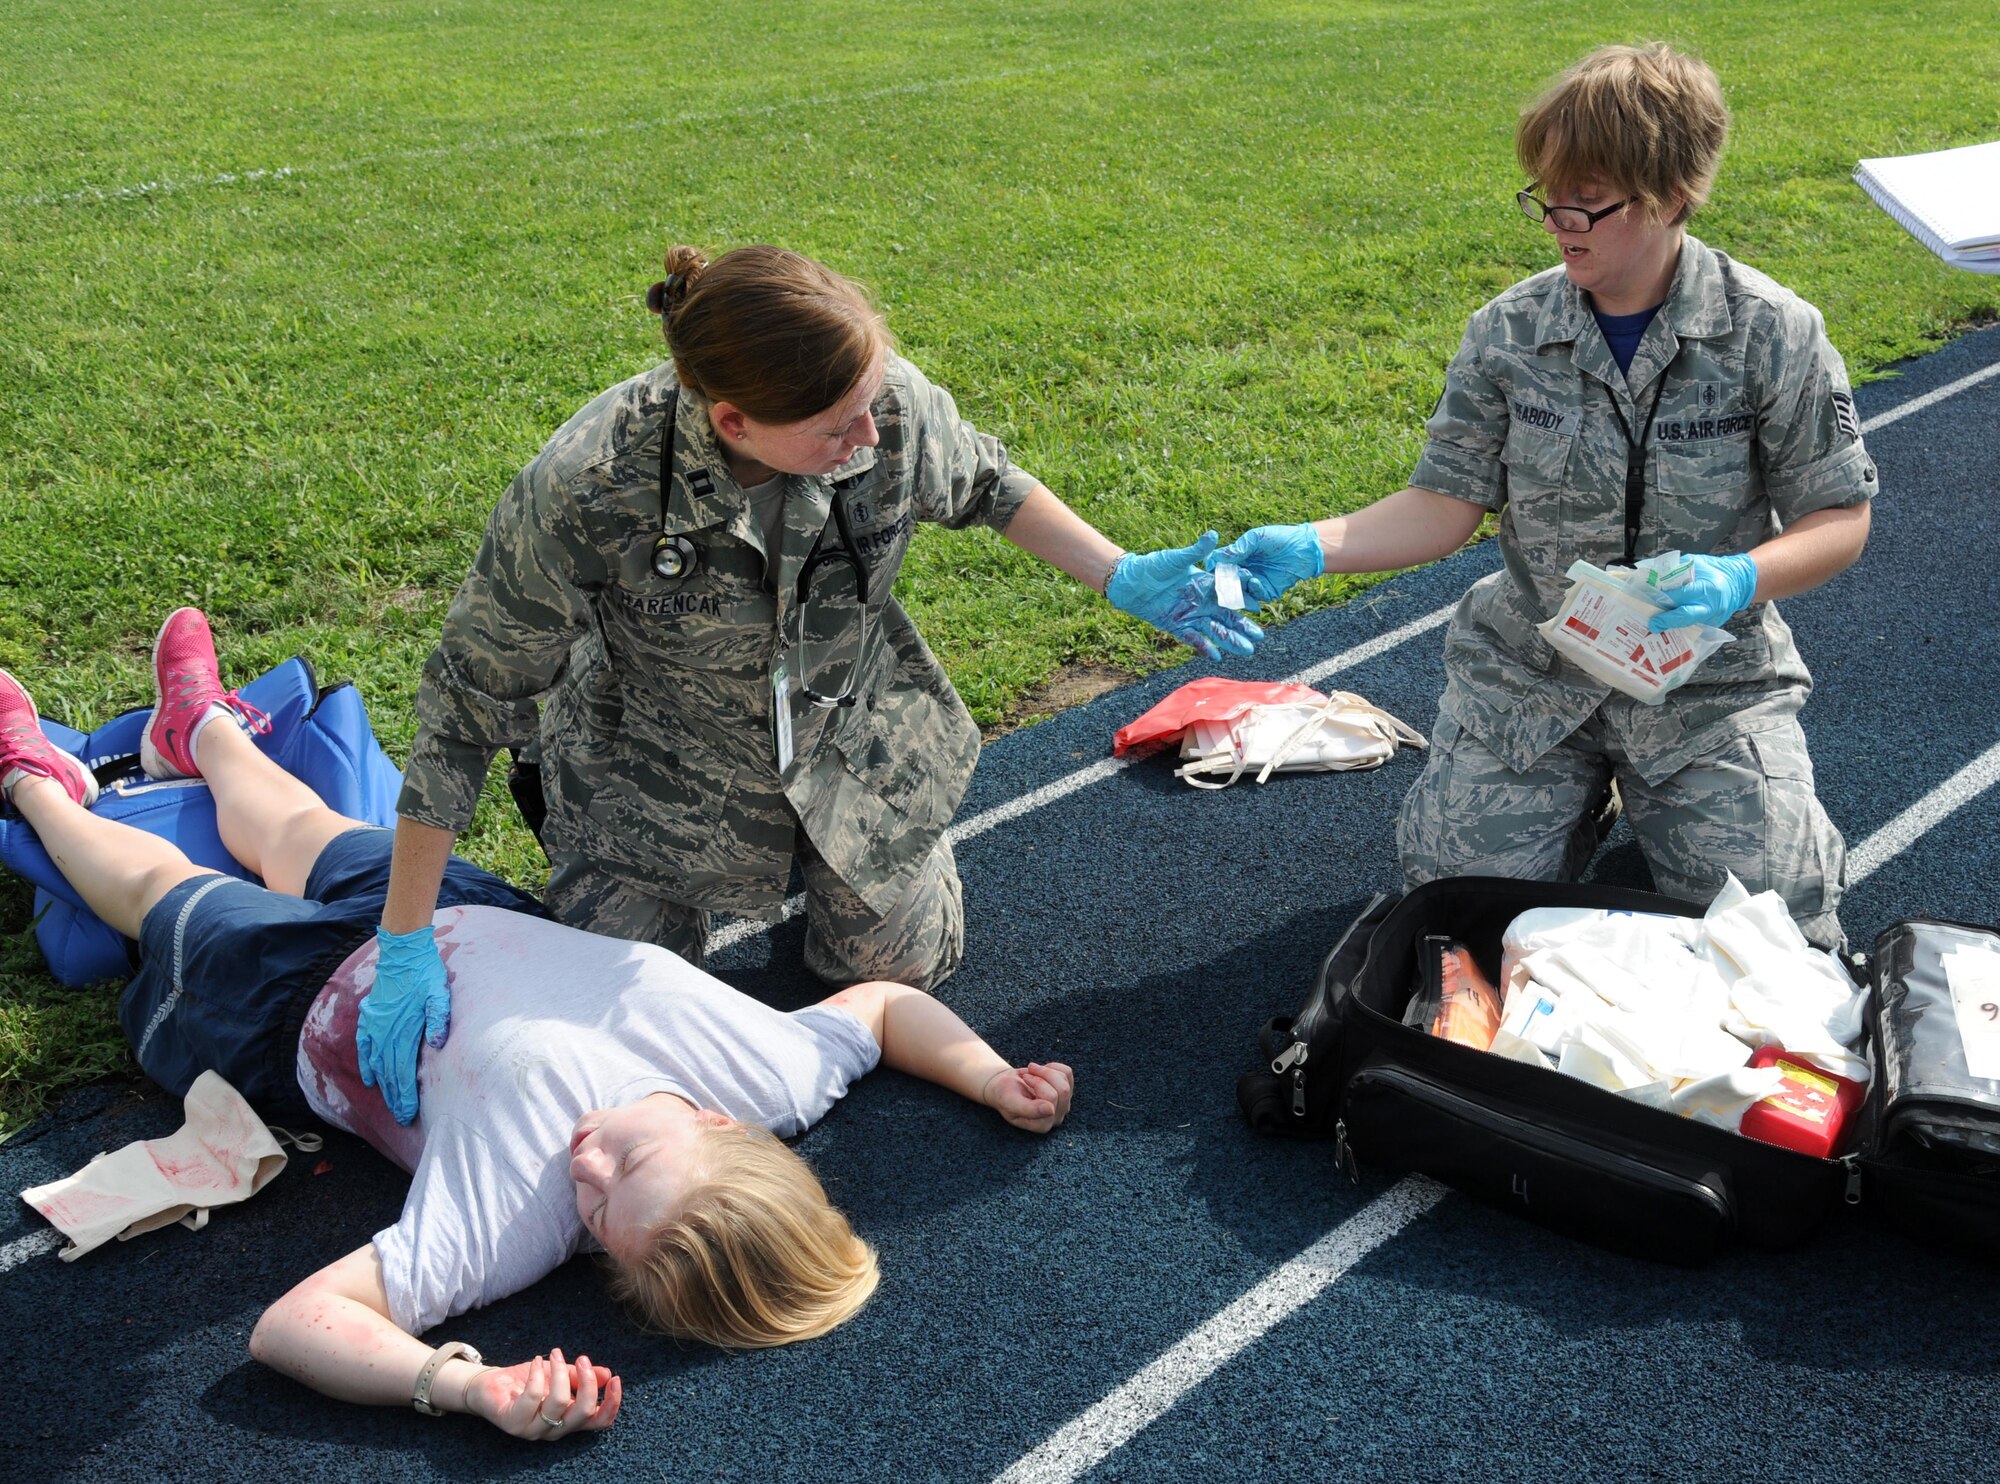 U.S. Air Force Staff Sgt. Christina Peabody, a 509th Medical Operations Squadron (MDOS) flight medicine technician, right, hands medication to Capt. Kallyn Harencak, a 509th MDOS flight surgeon, center, to treat a victim’s simulated abdominal injury during an active shooter exercise at Whiteman Air Force Base, Mo., Aug. 5, 2016. The medical technicians treated simulated wounds on the spot during the exercise, then triaged for further care. 